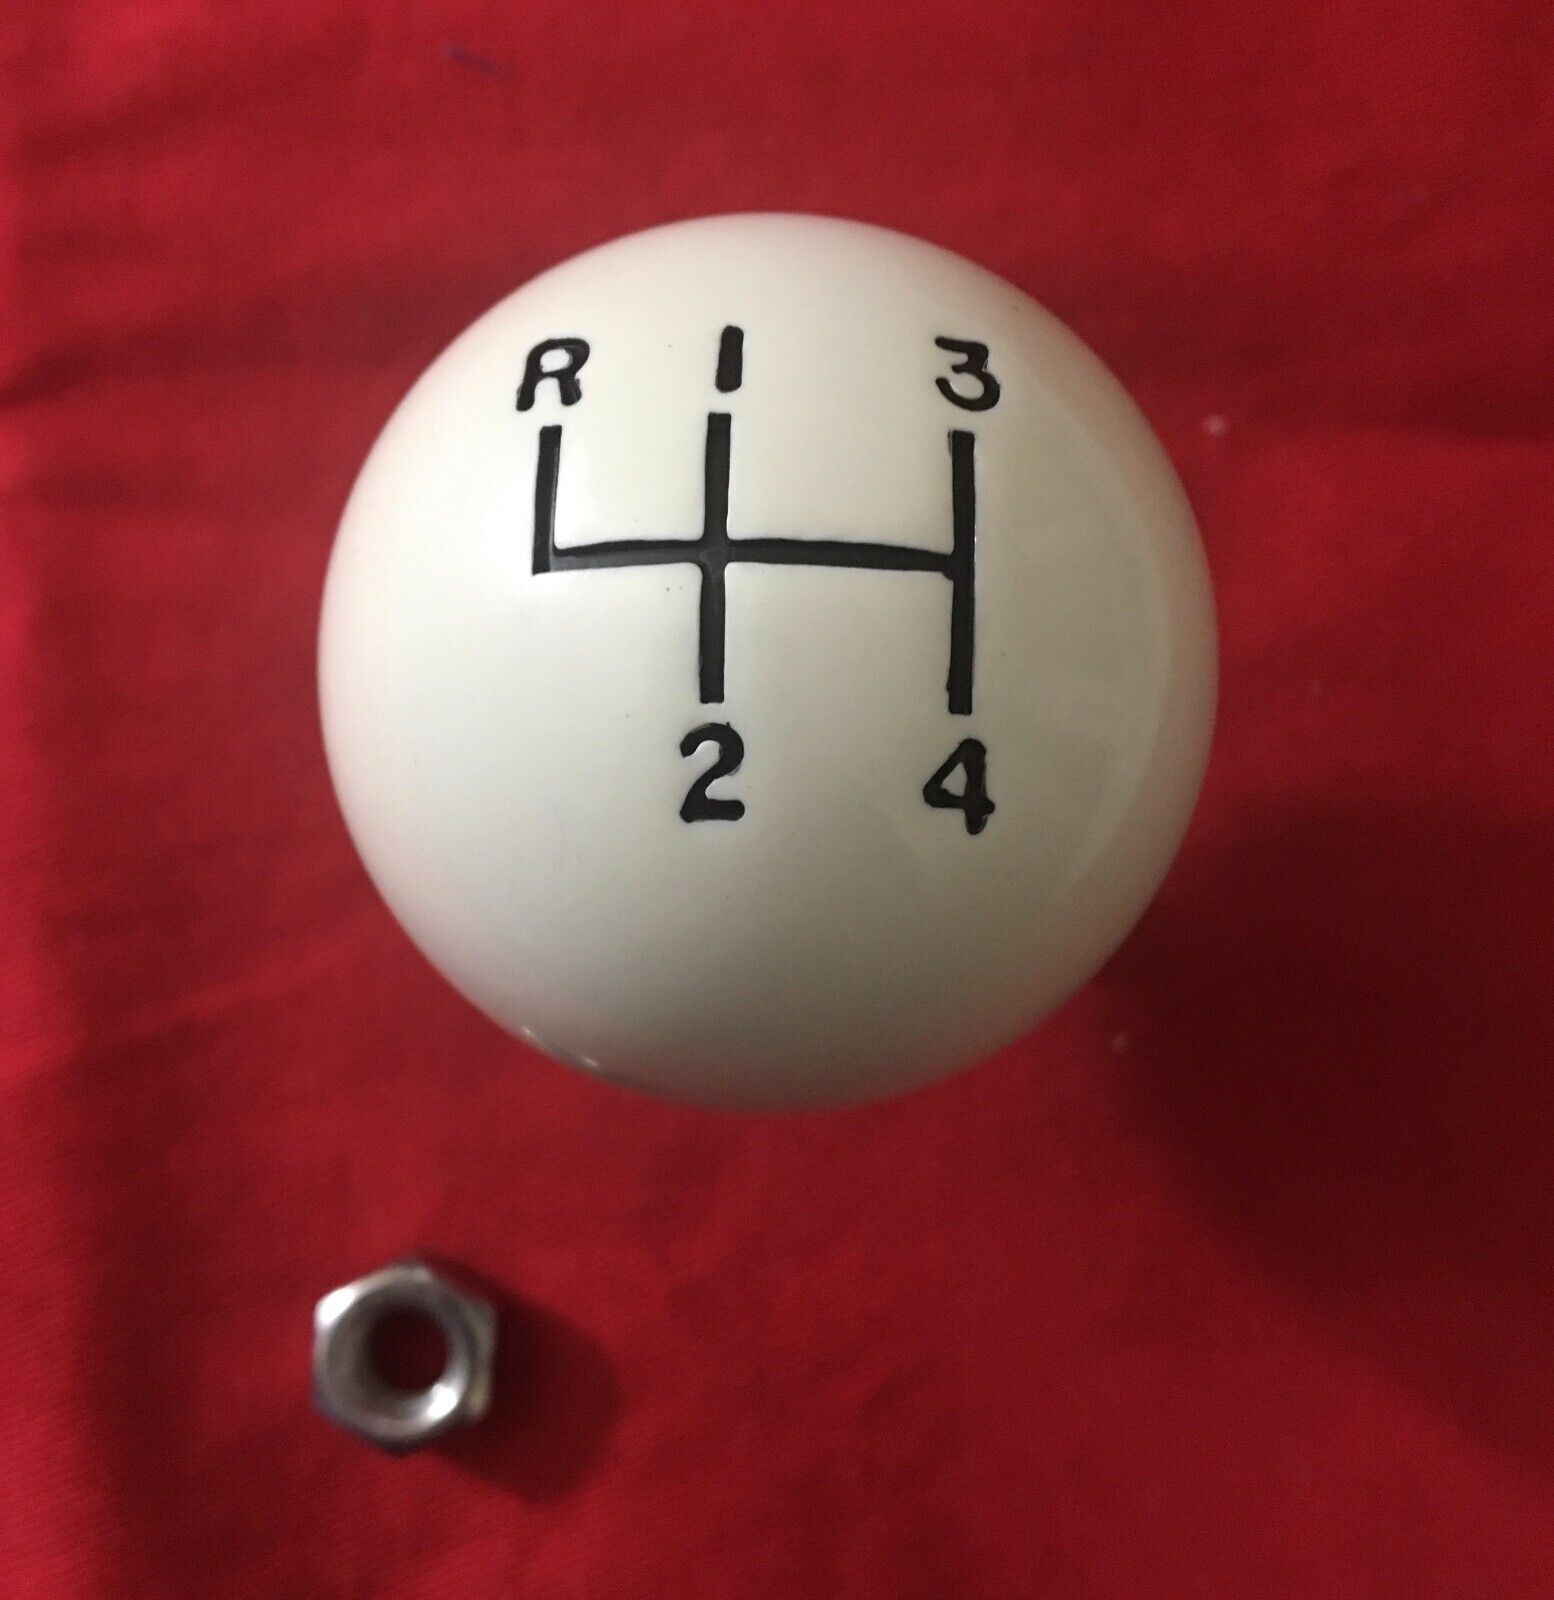 WHITE BALL 4 SPEED 5/16-18 SHIFT KNOB FOR MUNCIE & OTHER SHIFTERS